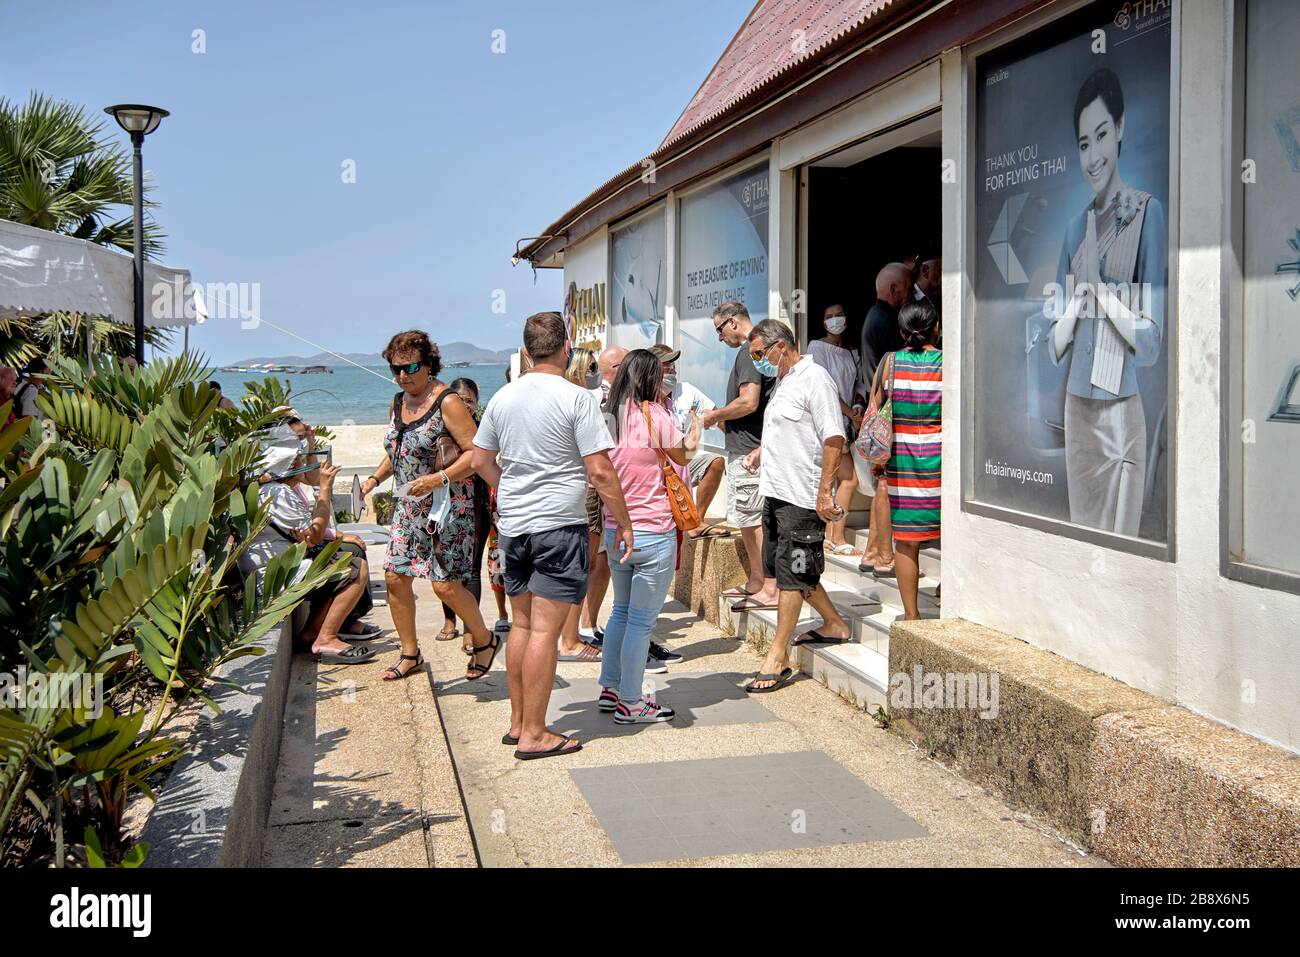 COVID-19 scare. Thailand tourists queueing at the Thai Airways Pattaya booking office anxious to return home fearful of the Corona virus threat Stock Photo